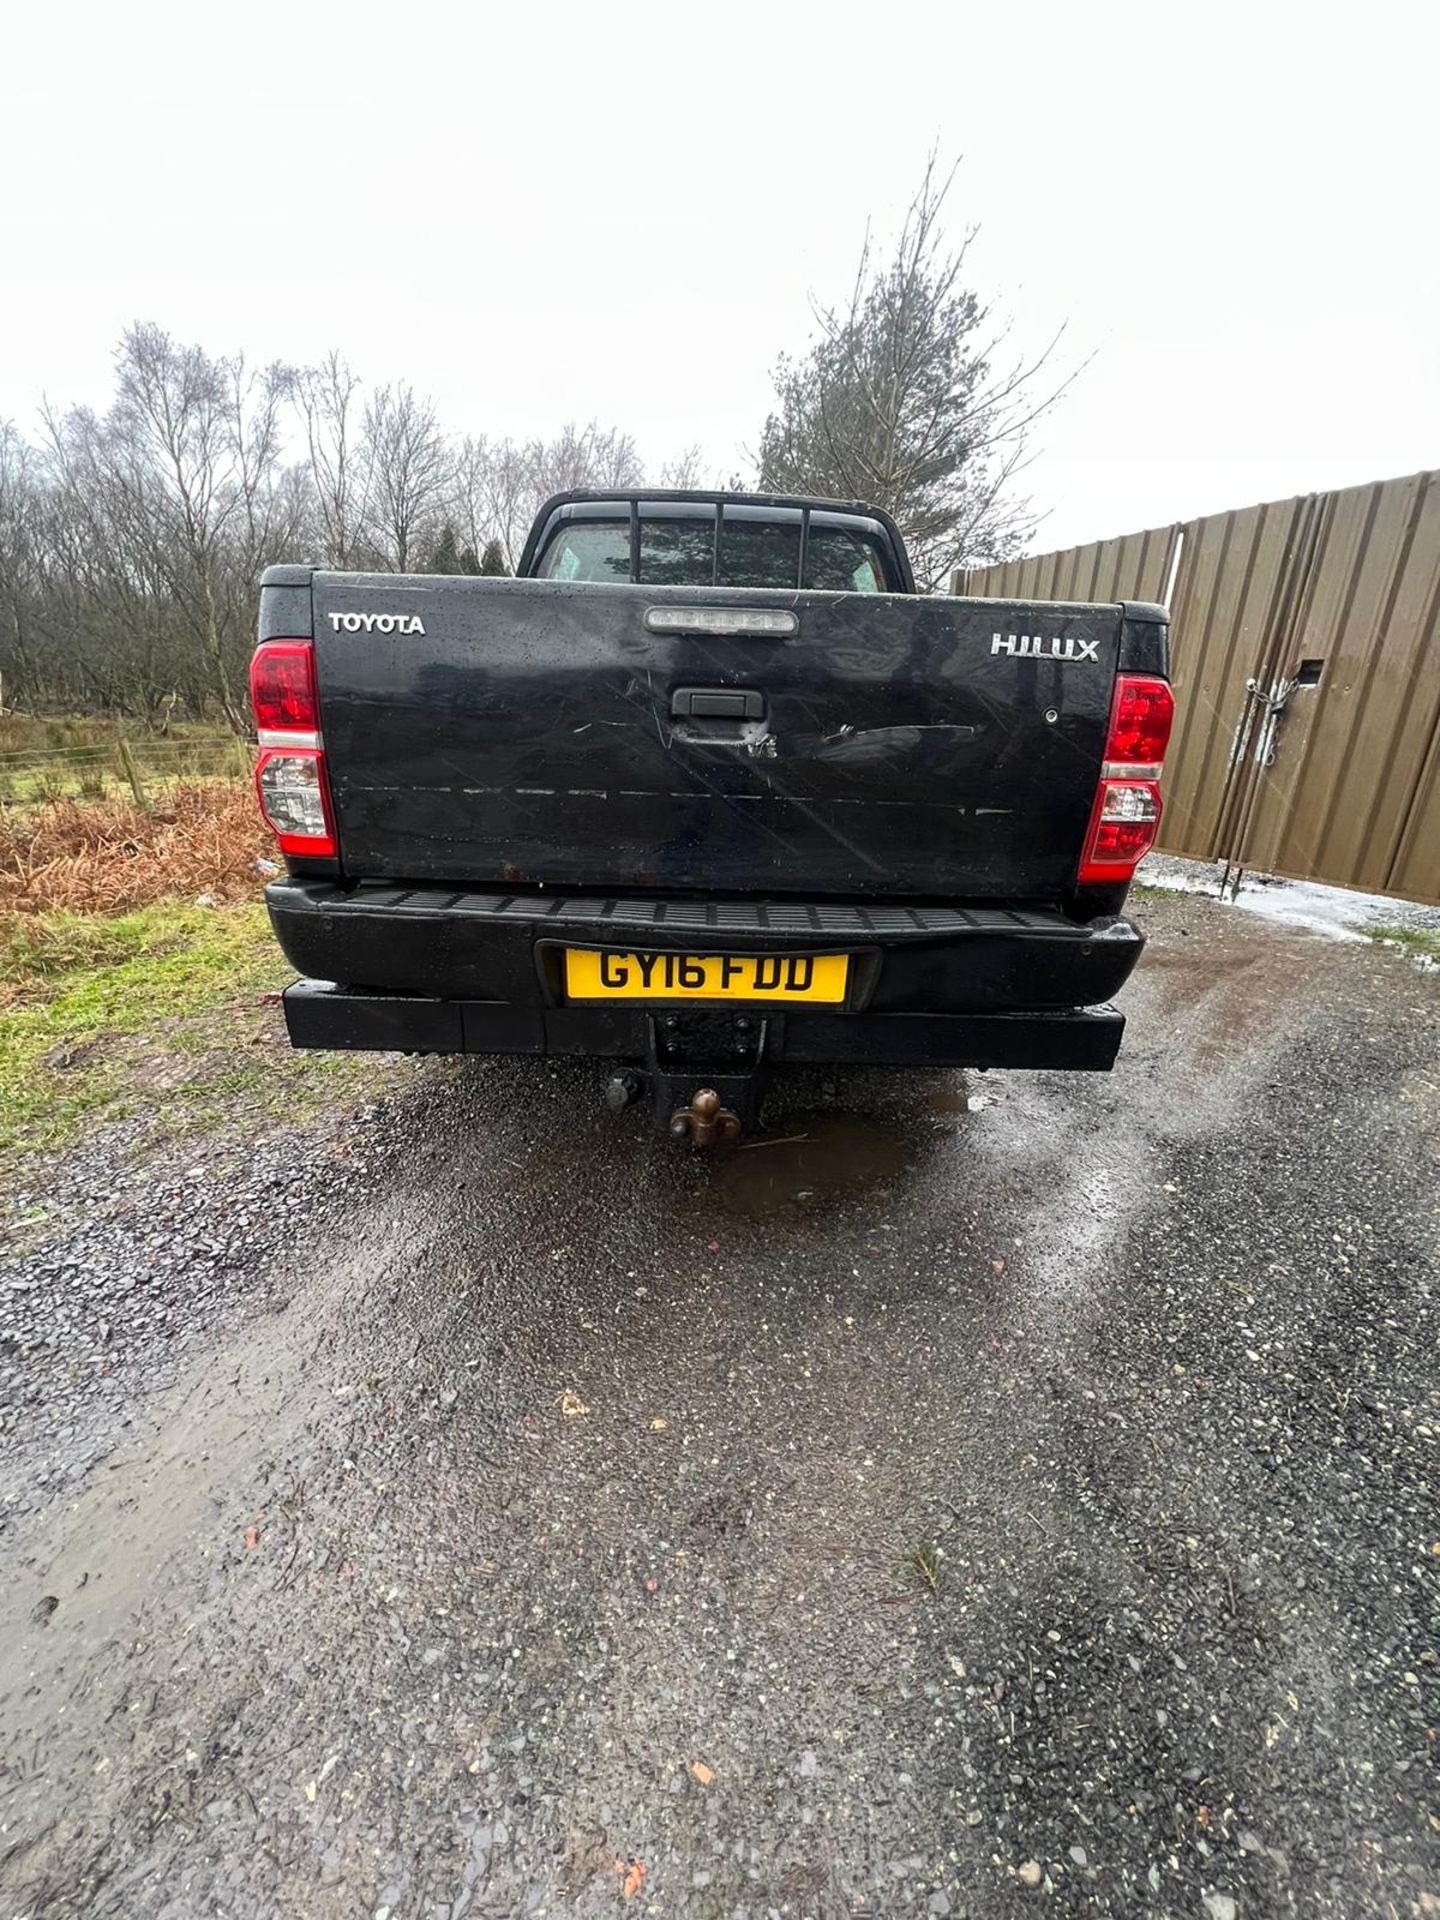 2016 TOYOTA HILUX ACTIVE 2X4 4X4 + DIFF LOCK - Image 11 of 22